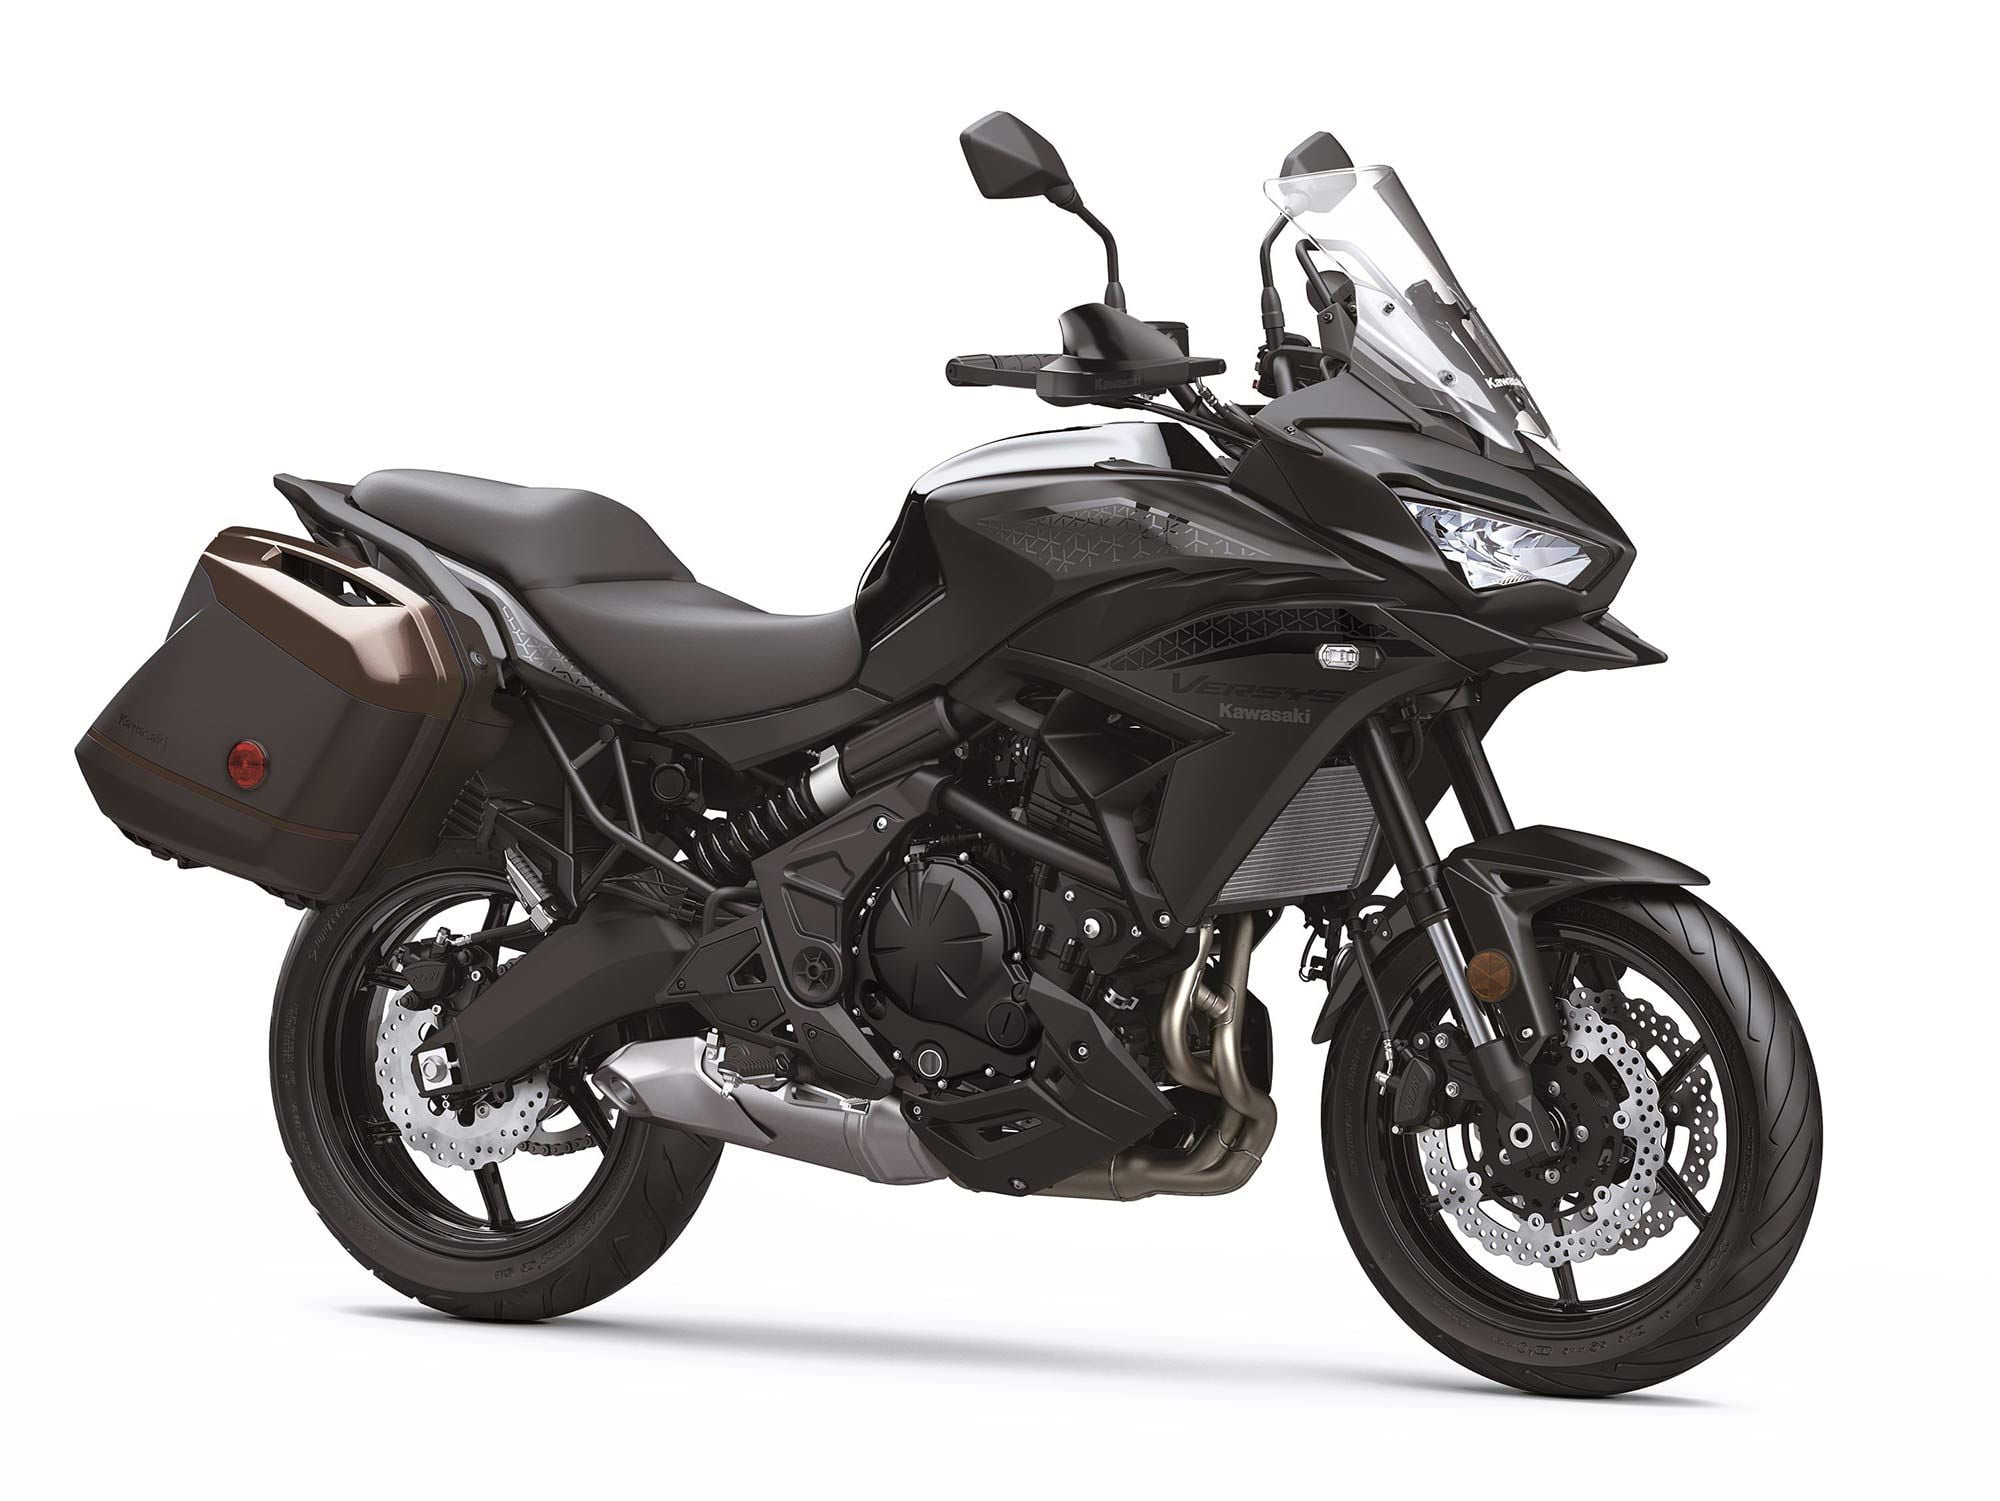 The 2022 Kawasaki Versys 650 LT and Versys 650 become more modern than ever in 2022.